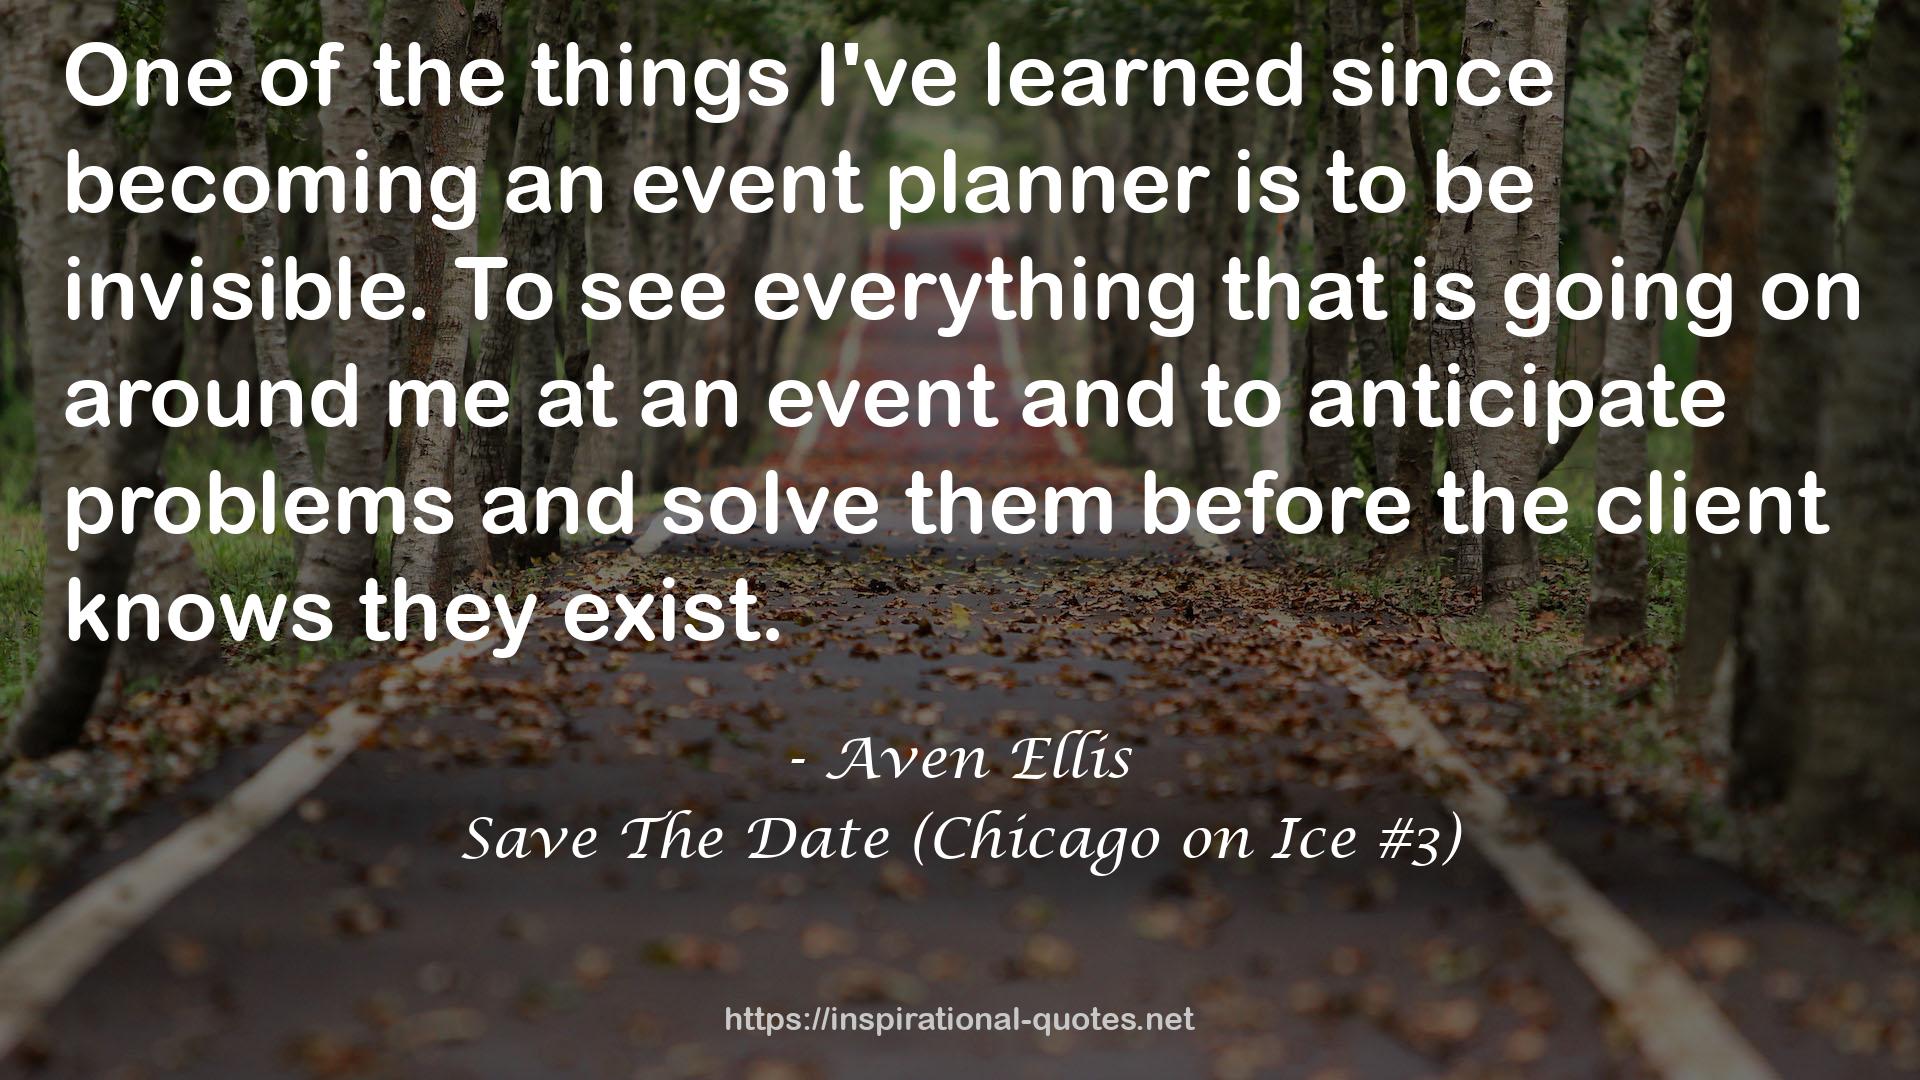 Save The Date (Chicago on Ice #3) QUOTES